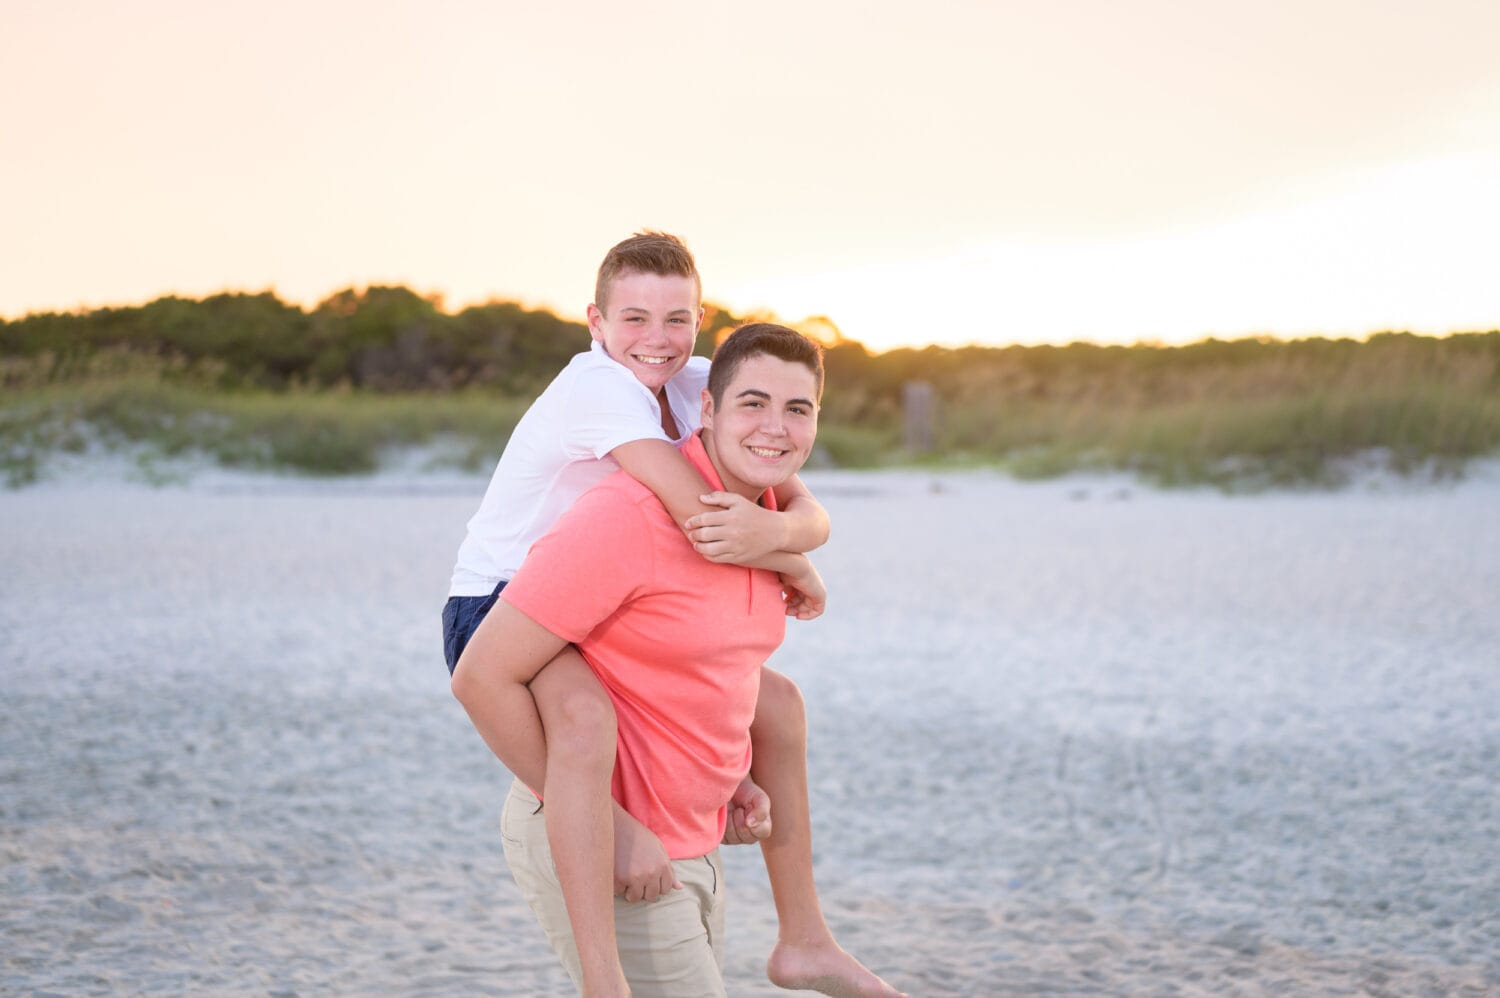 Brother giving a piggyback ride - Huntington Beach State Park